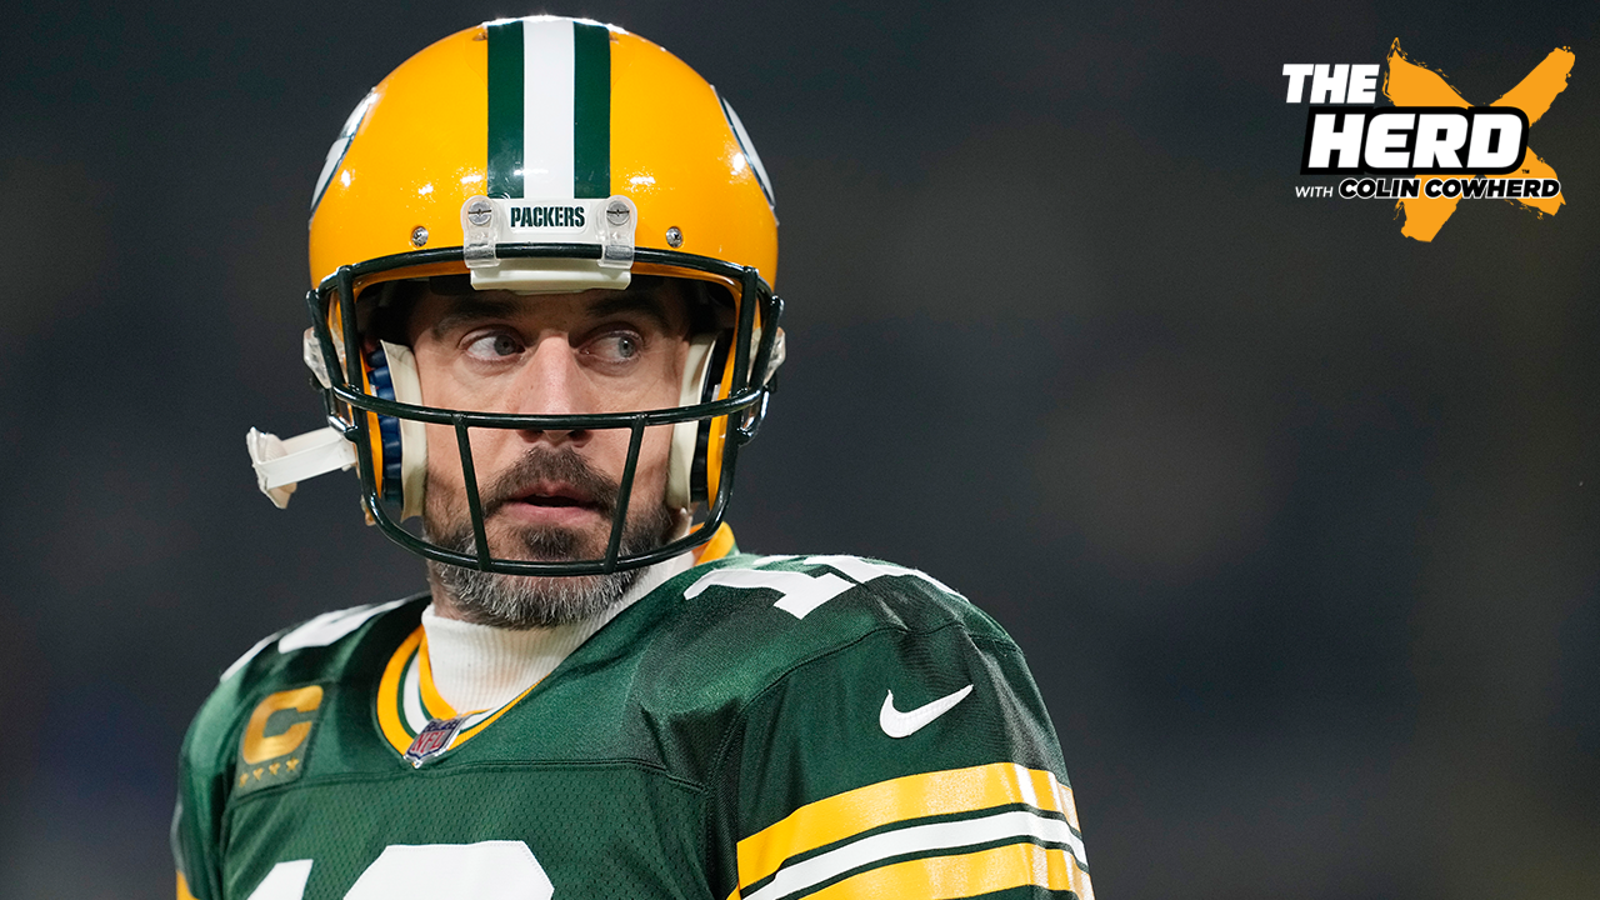 Aaron Rodgers is not certain to return to Green Bay